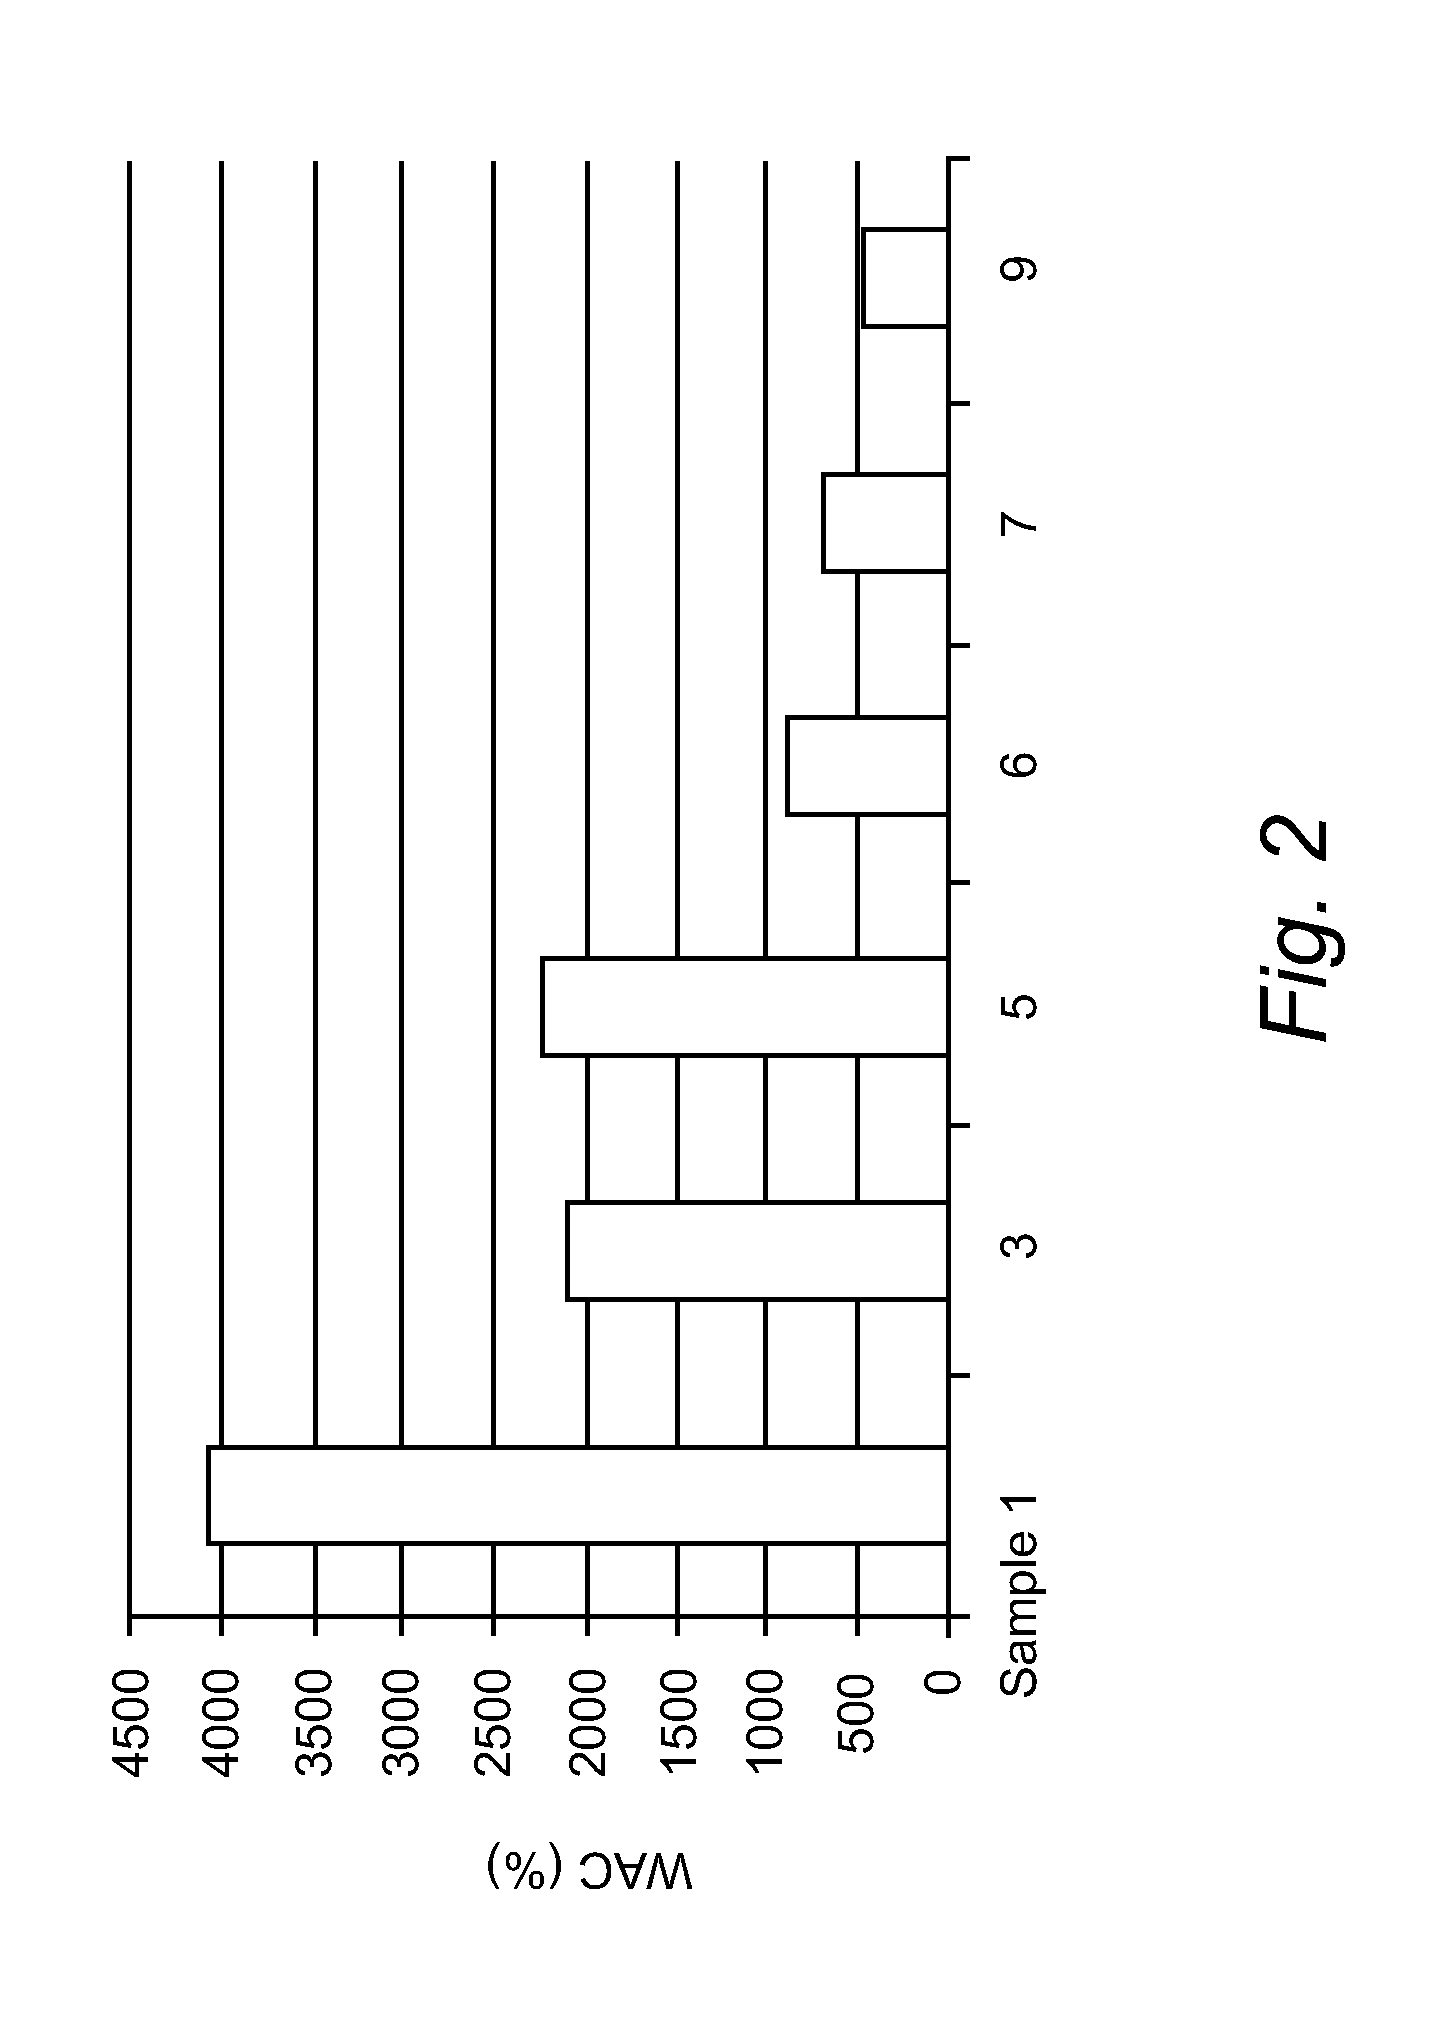 Hyaluronic acid cryogel - compositions, uses, processes for manufacturing